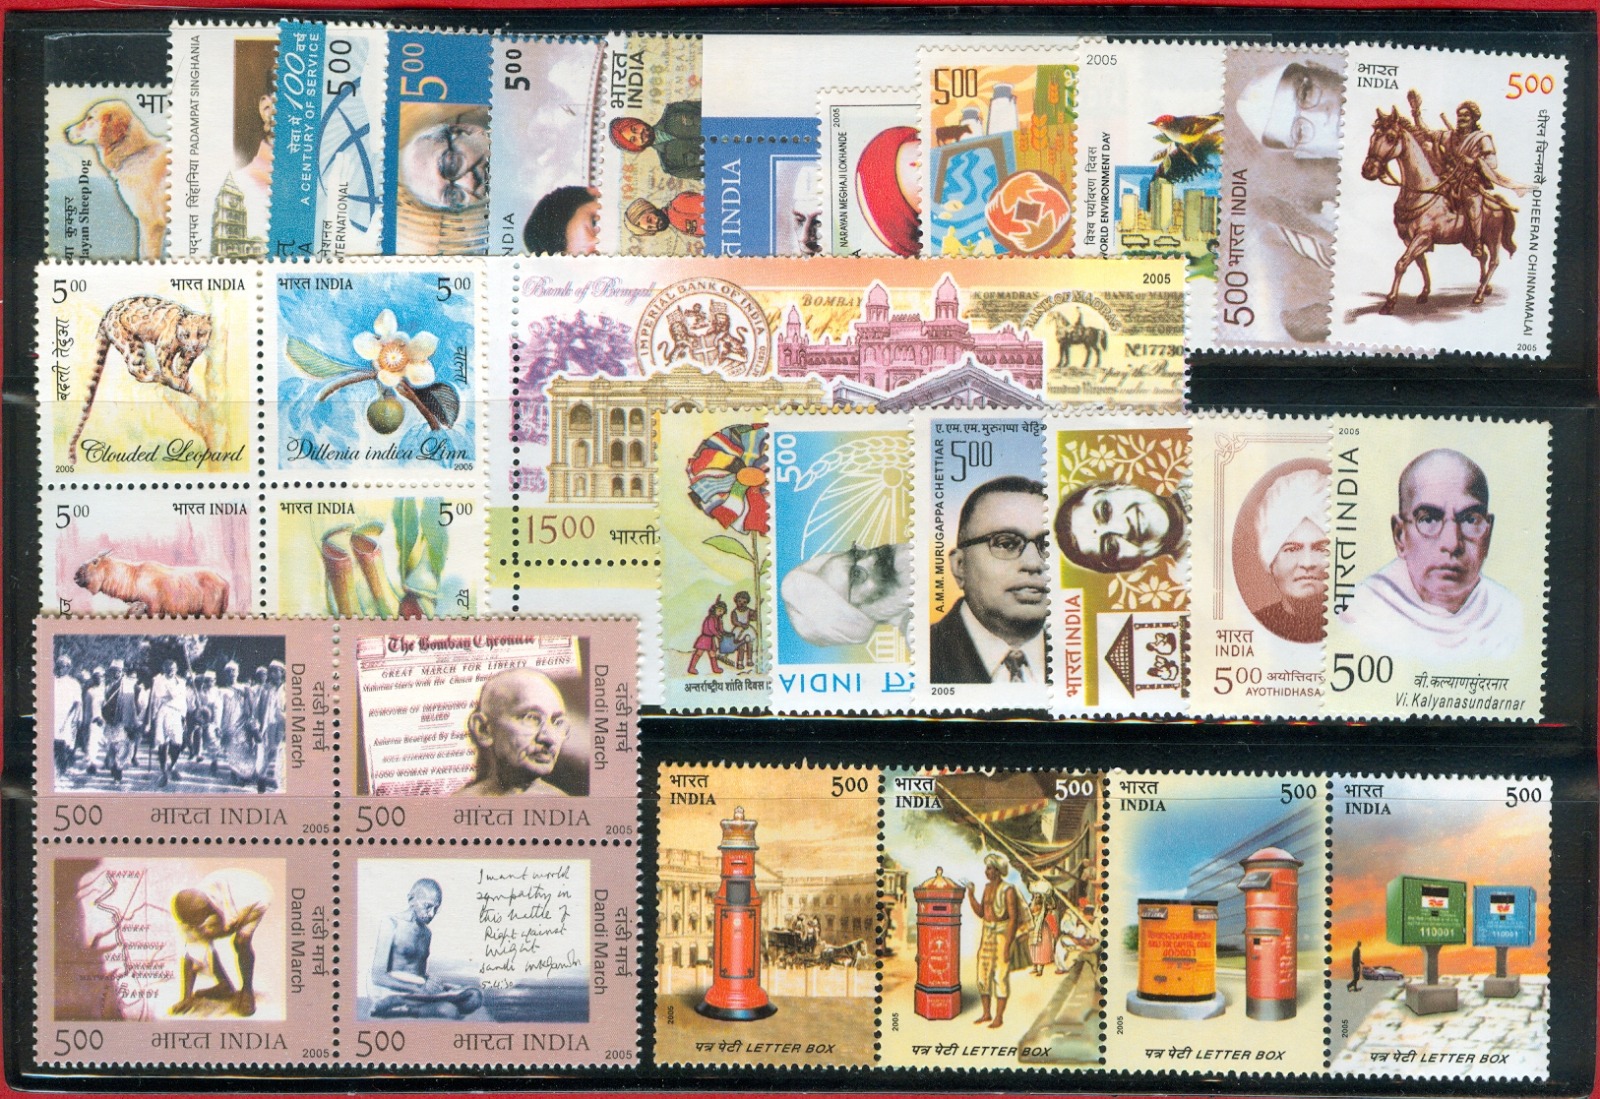 India 2005 Year Pack Full Complete Set of 49 Stamps Including setenants Stamps MNH Fresh (Cat Val-2100)